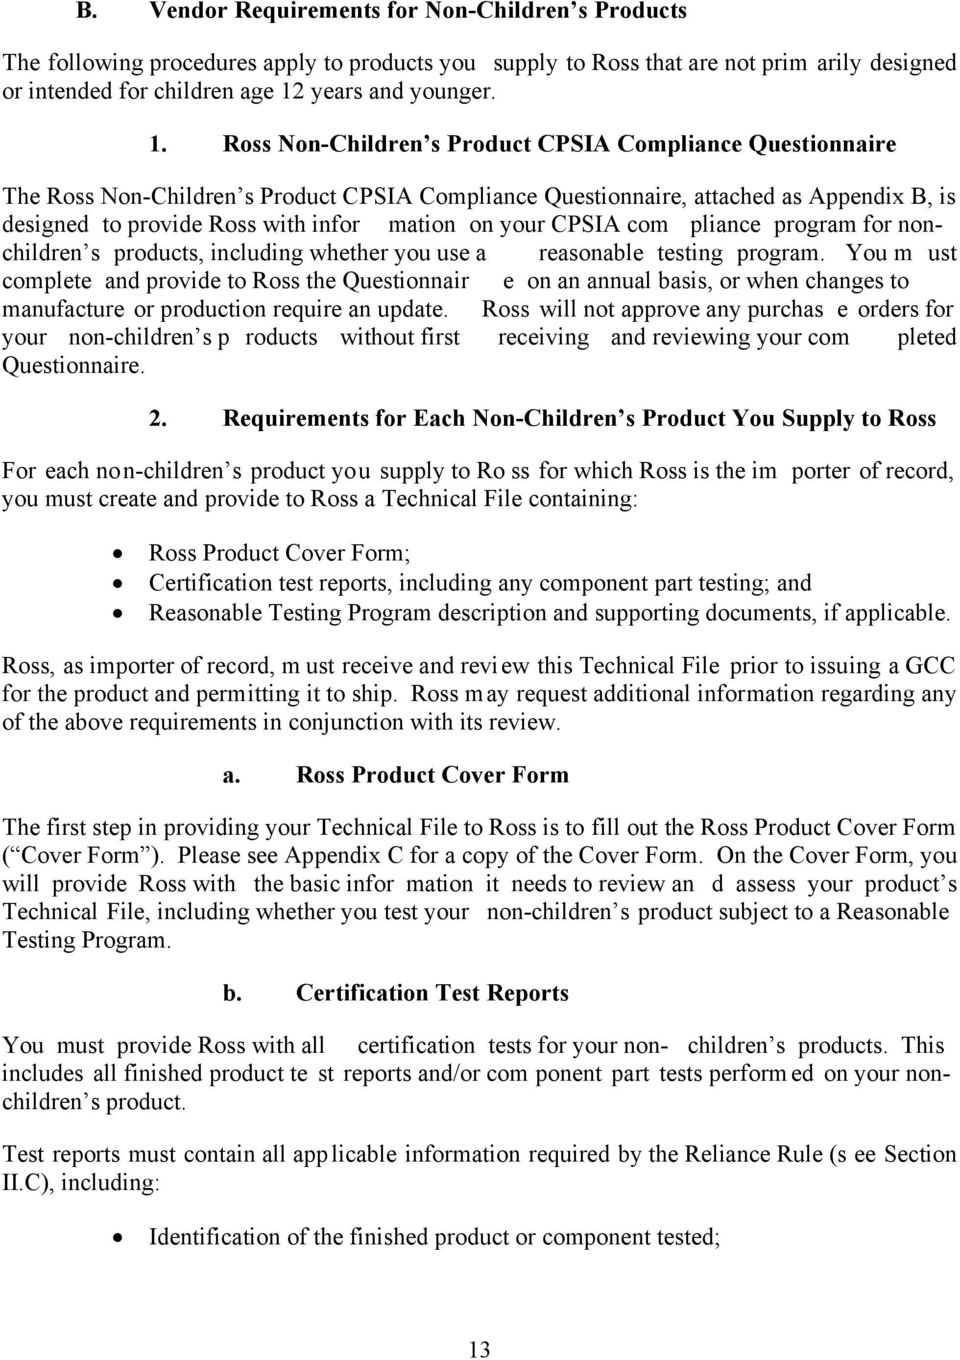 Ross Non-Children s Product CPSIA Compliance Questionnaire The Ross Non-Children s Product CPSIA Compliance Questionnaire, attached as Appendix B, is designed to provide Ross with infor mation on